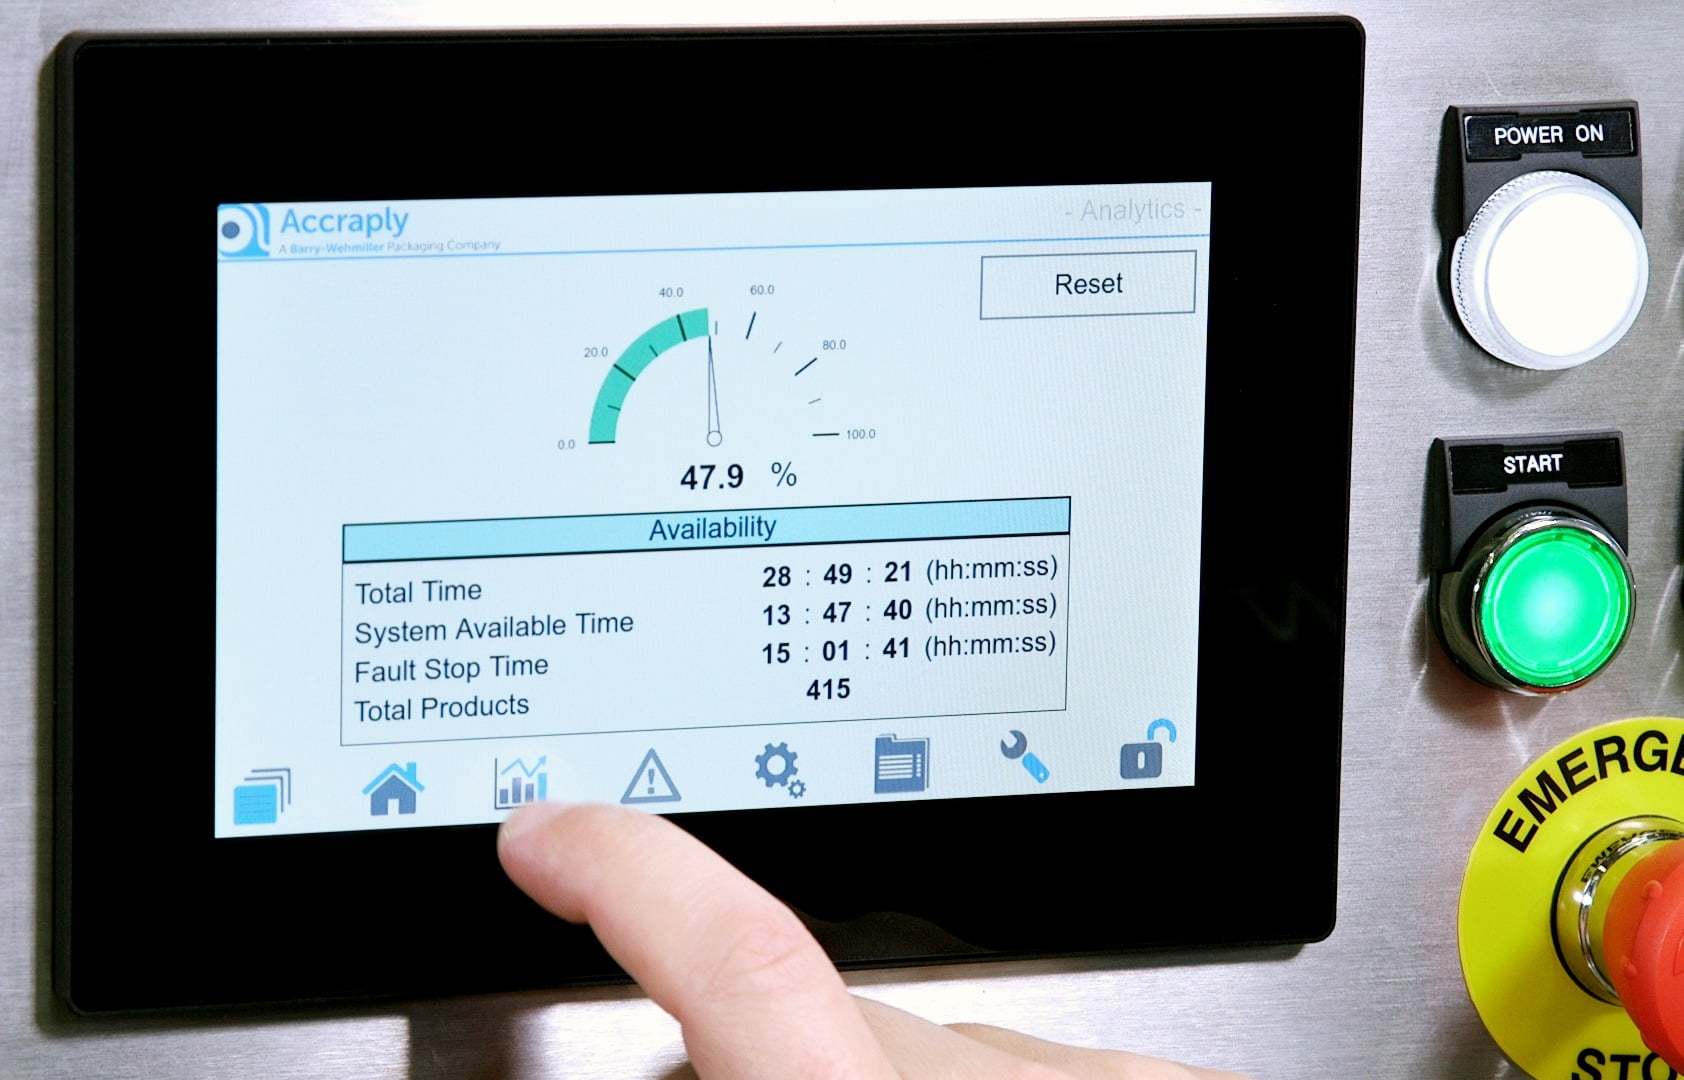 The Smartlink HMIs intuitive layout makes screens easily navigable.